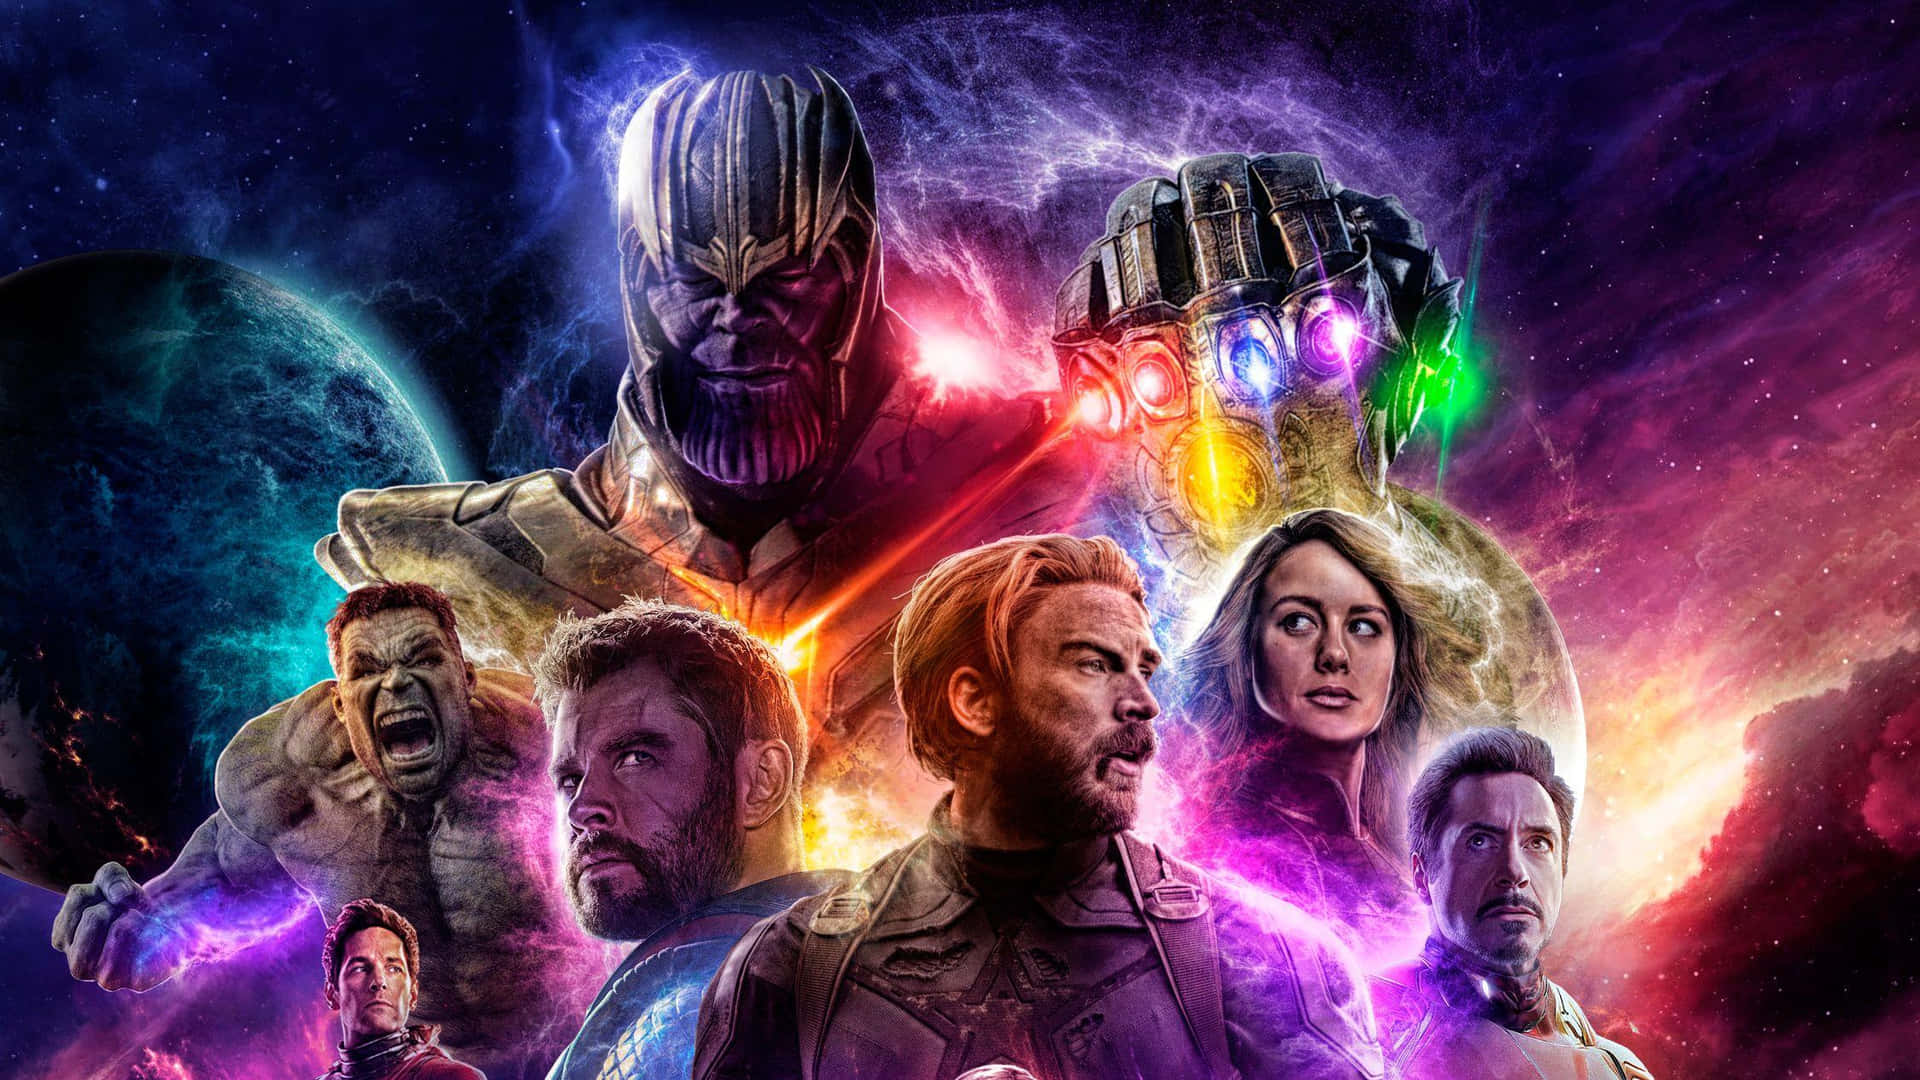 Avengers Endgame – Photo from the official premiere!